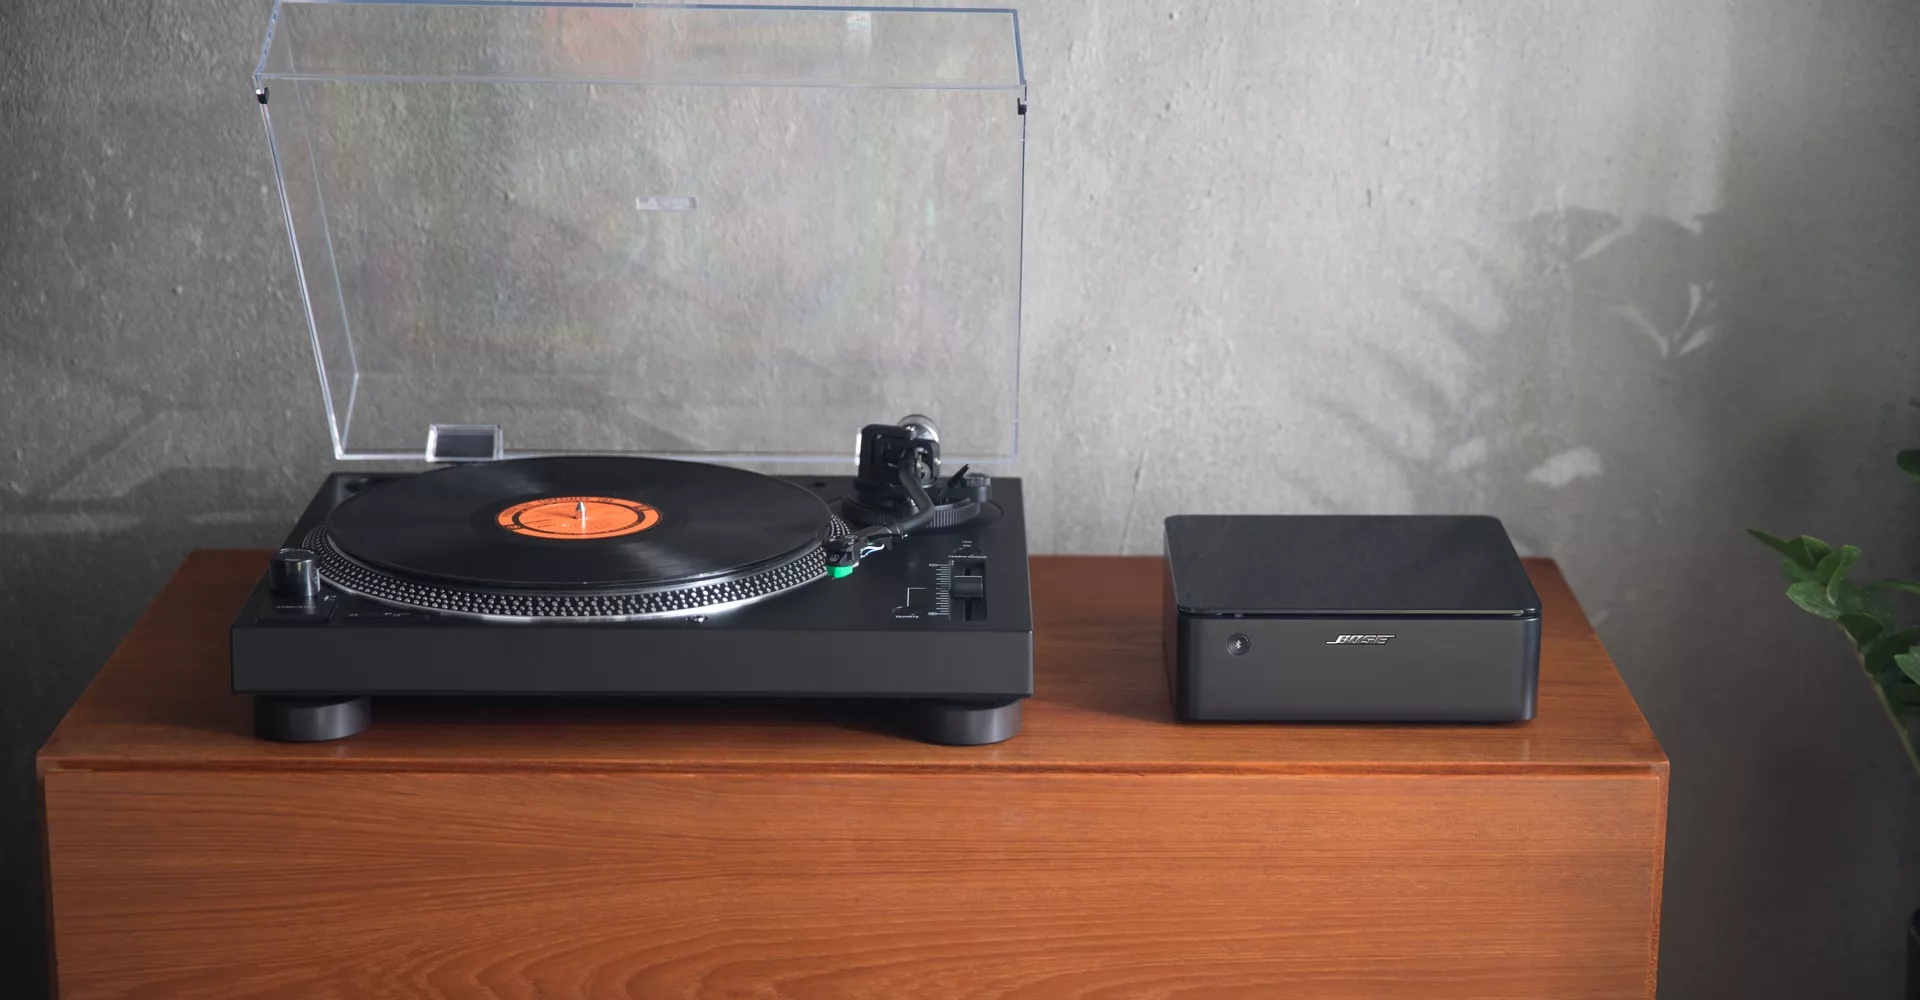 Bose Music Amplifier powering vinyl record player in living room